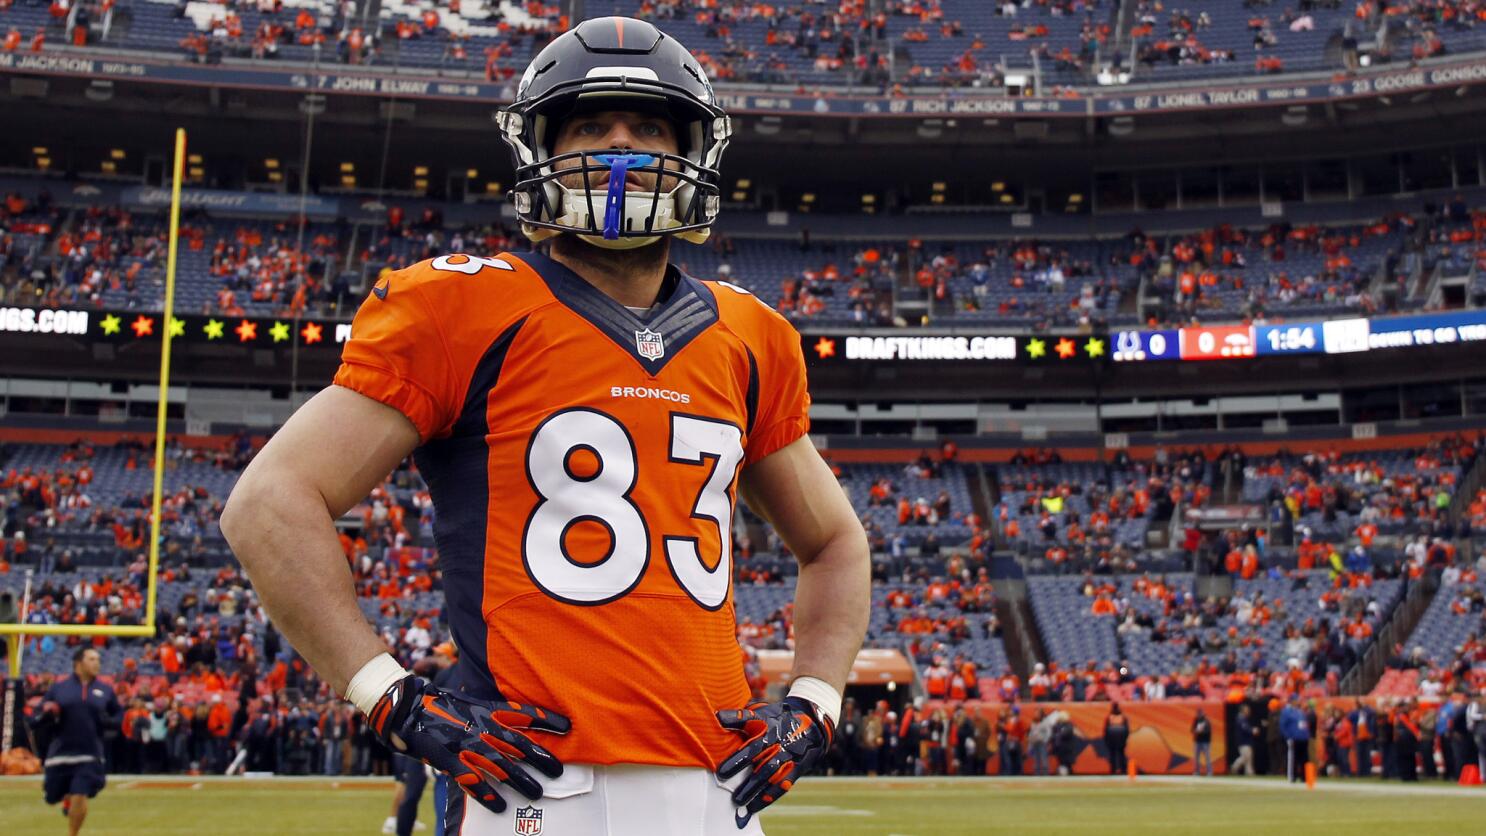 Broncos WR Wes Welker waits for concussion clearance